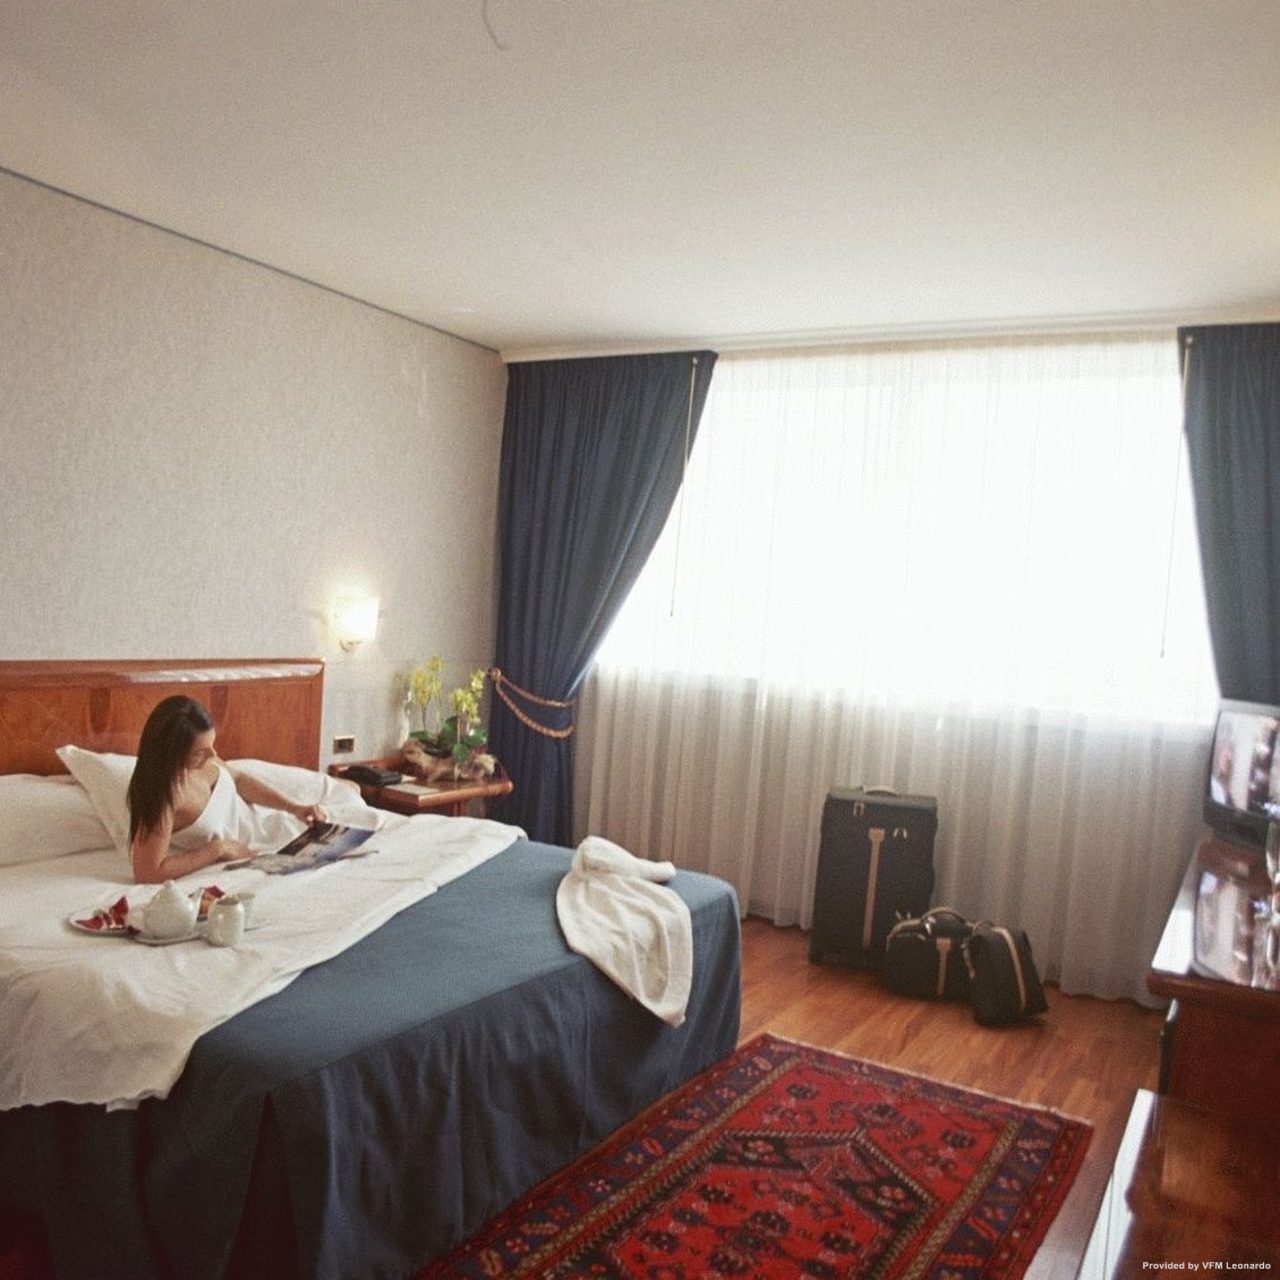 Montresor Hotel Tower Italy- at HRS with free services